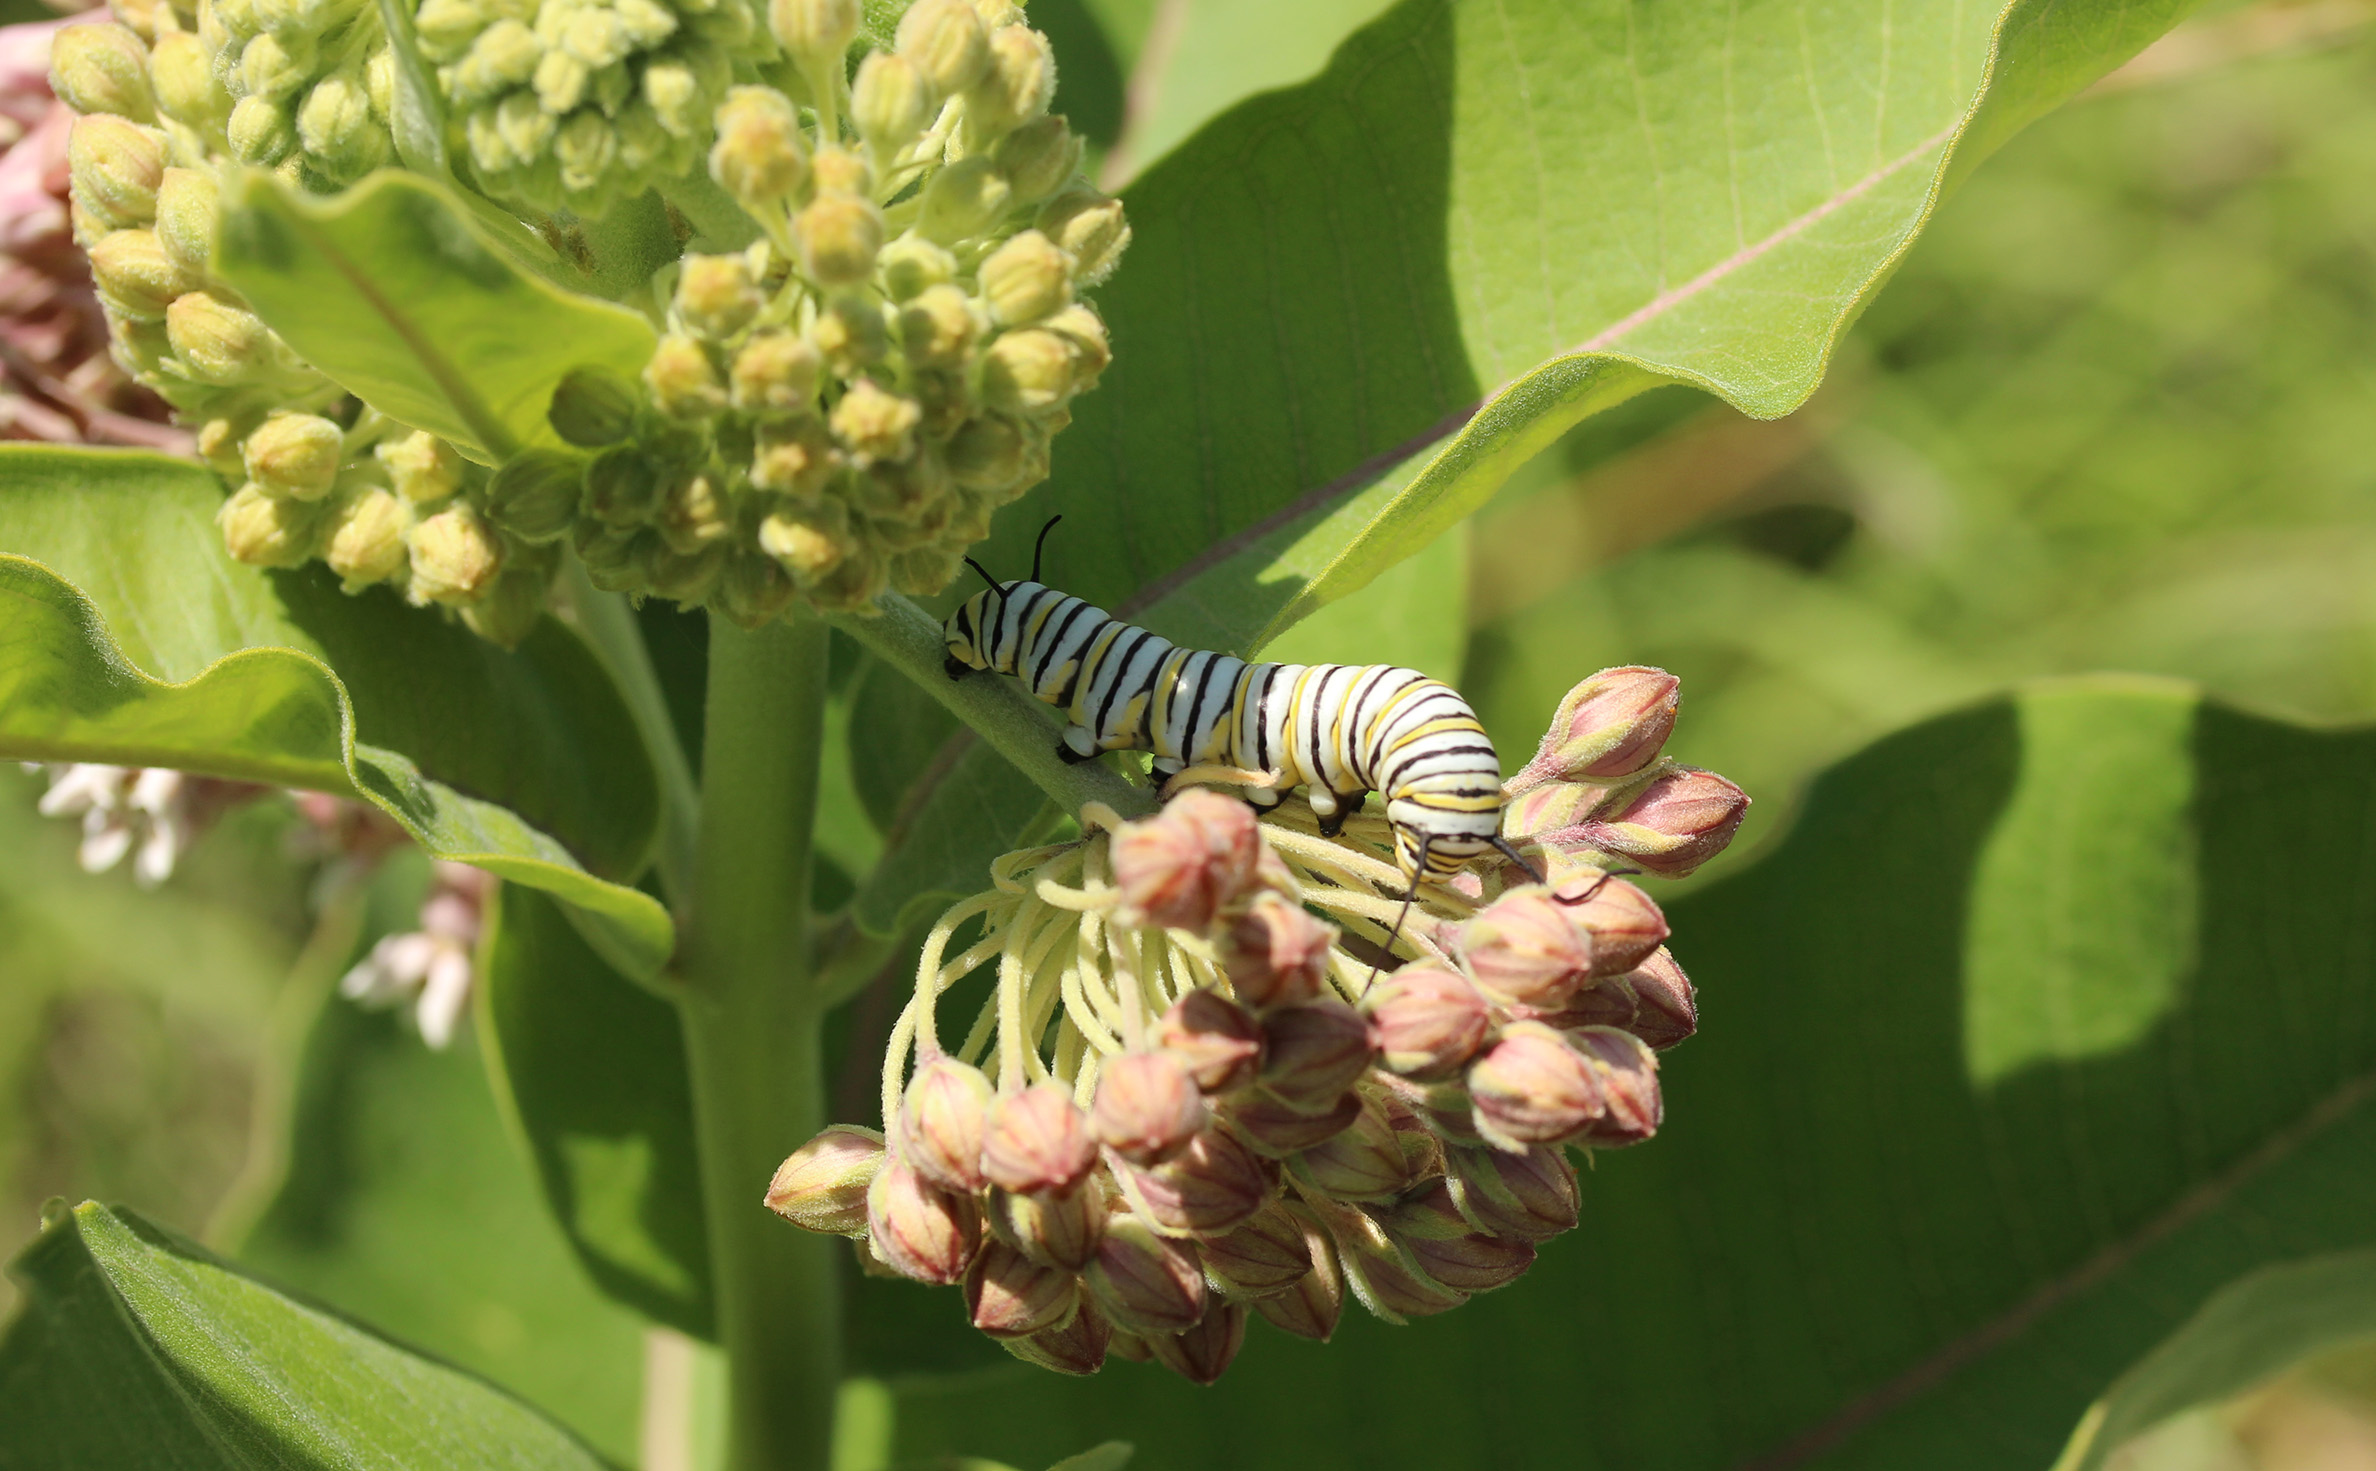 A black, yellow, and white striped monarch caterpillar on the pink flowers of milkweed.